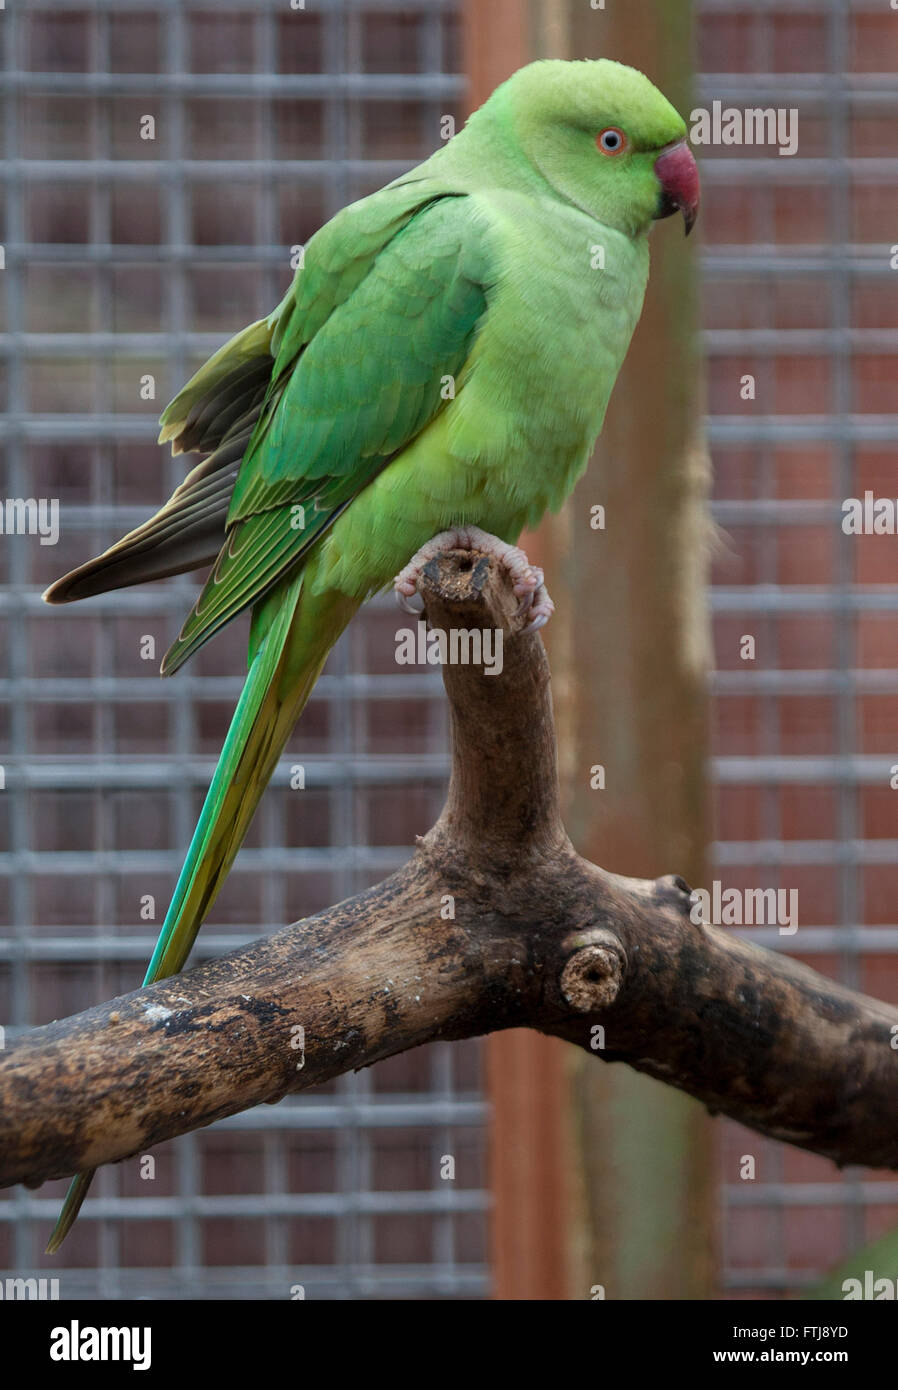 Ring-necked Parakeet, Psittacula krameri, Perched in aviary Stock Photo